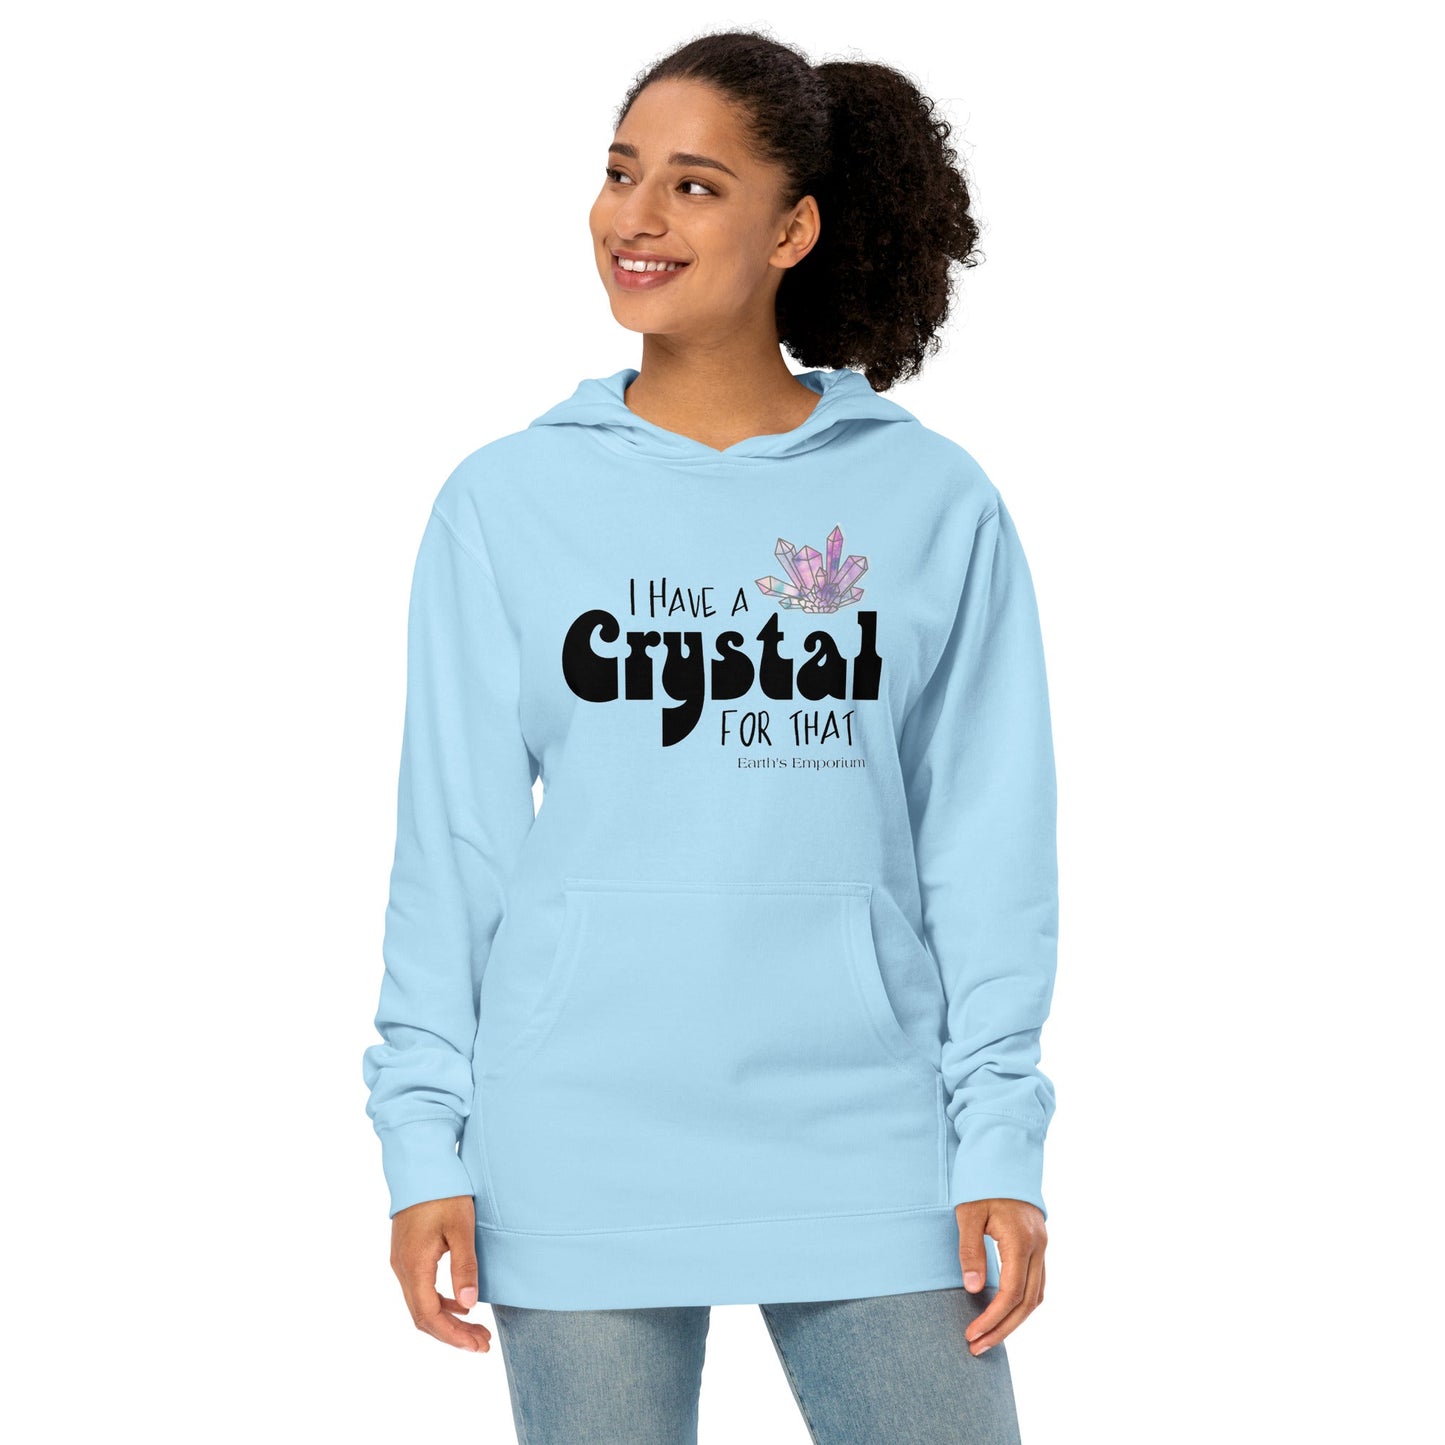 "I have a crystal for that" Unisex midweight hoodie - Earth's Emporium